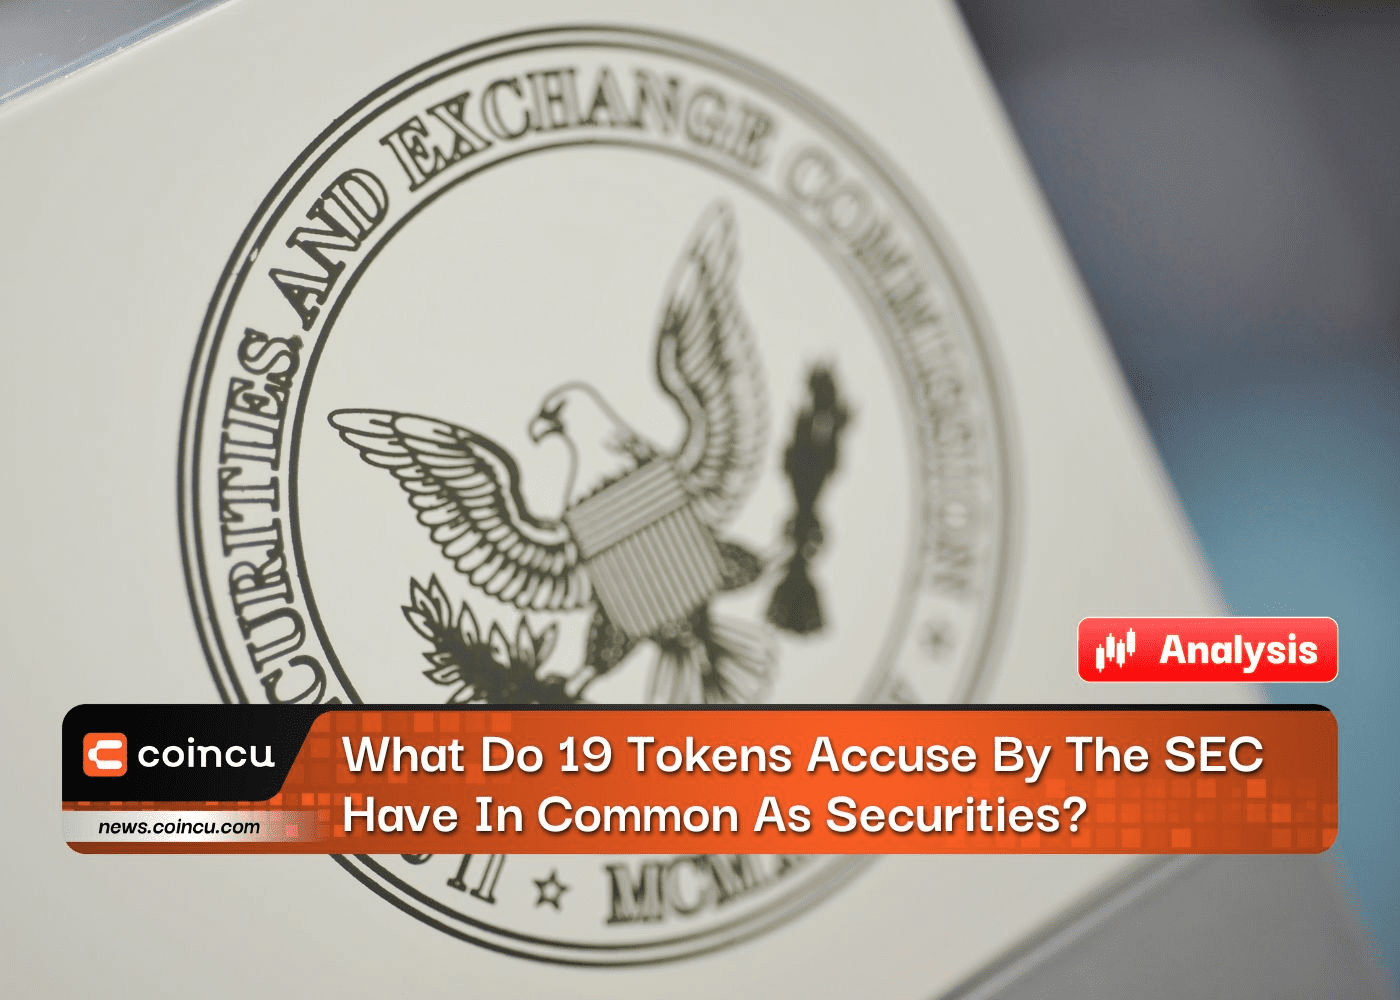 What Do 19 Tokens Accuse By The SEC Have In Common As Securities?